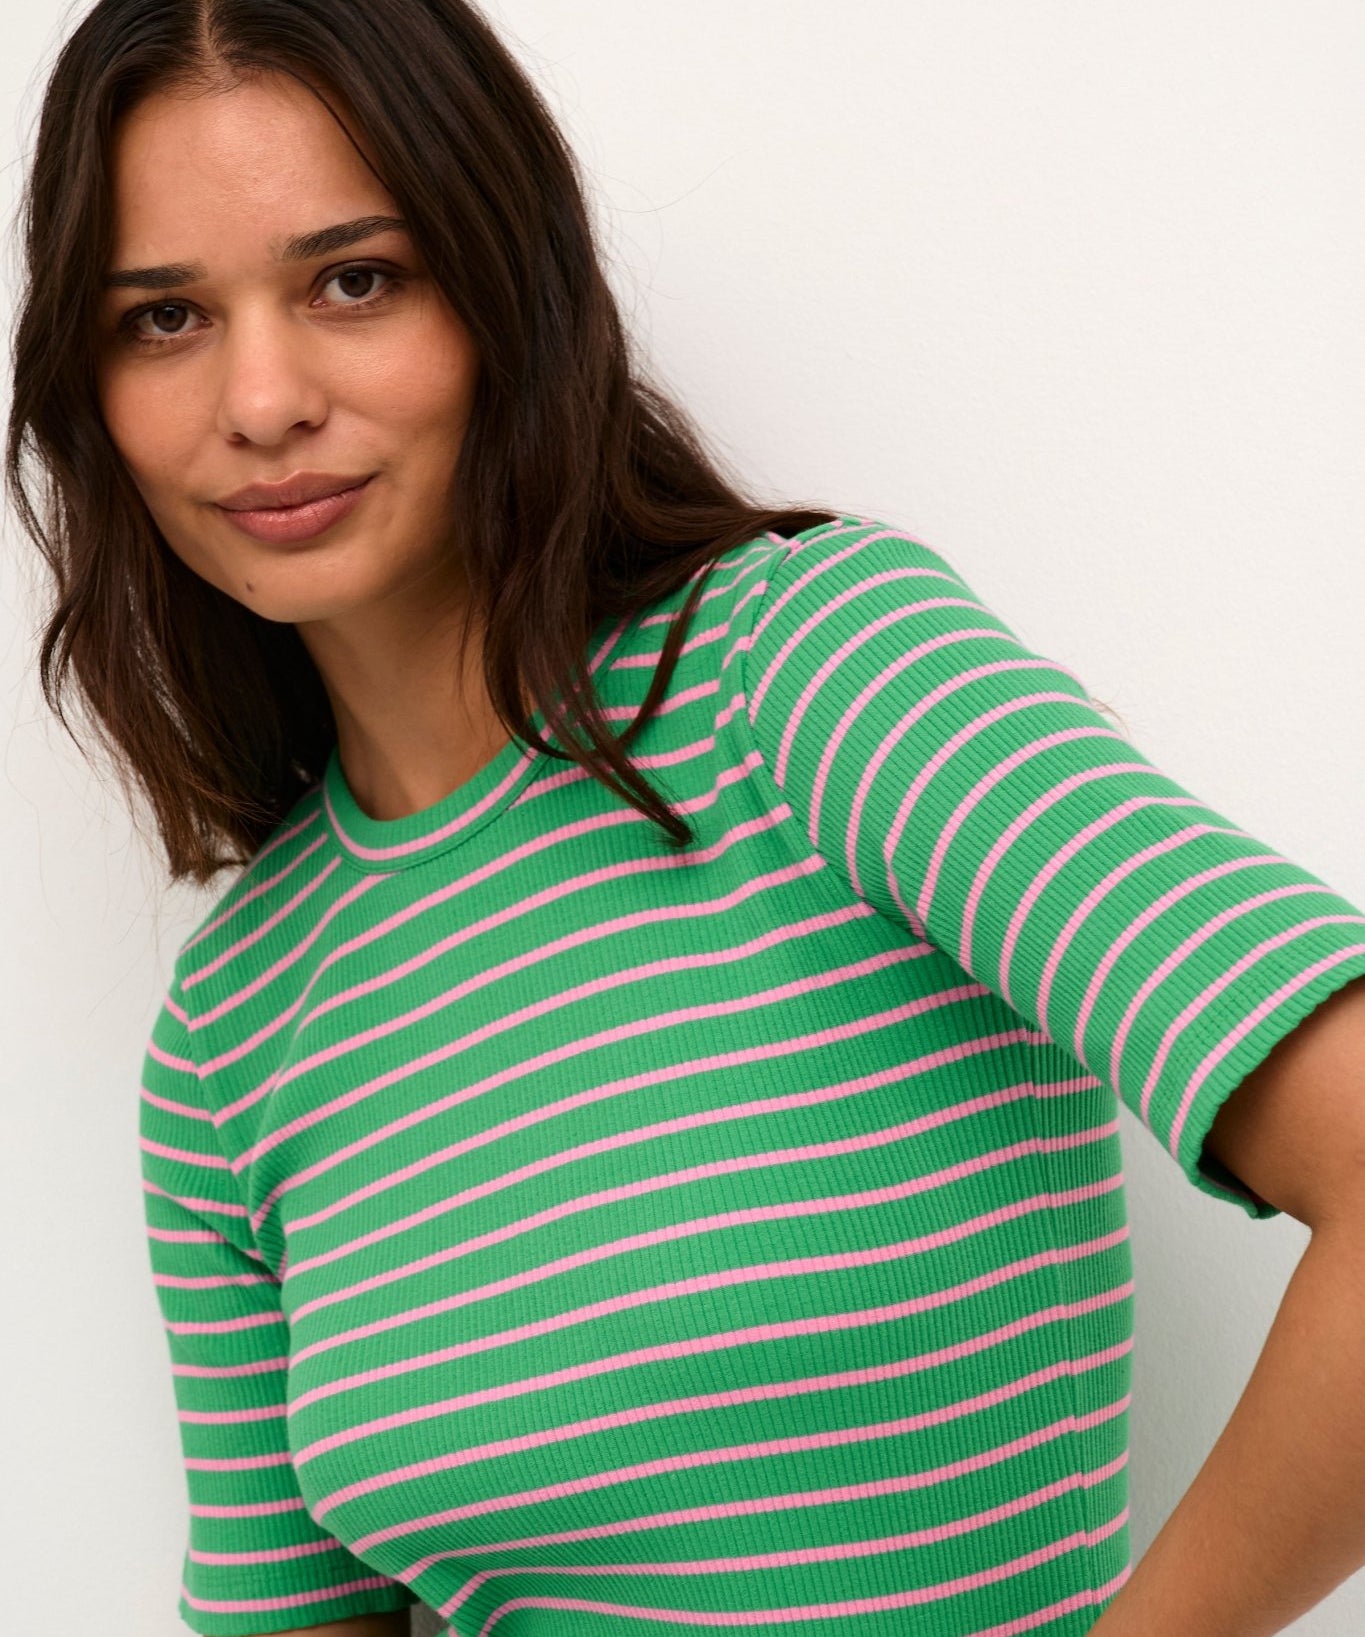 Dolly Striped Tee by Culture - Blue Sky Fashions & Lingerie